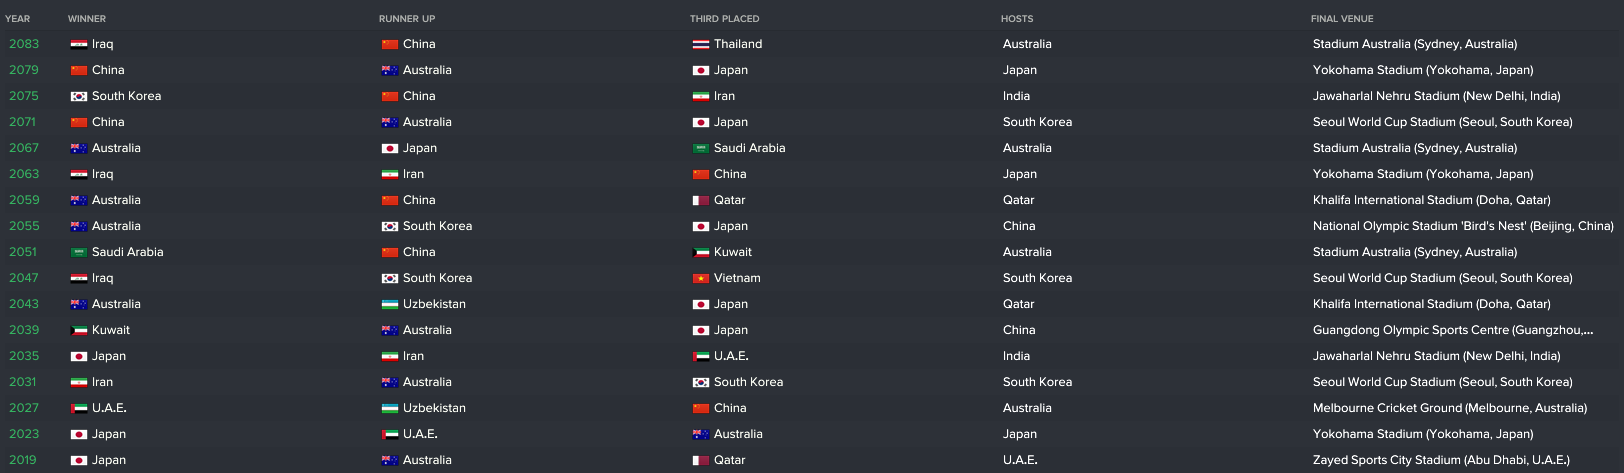 asian_nations_cup_winners.png?dl=1